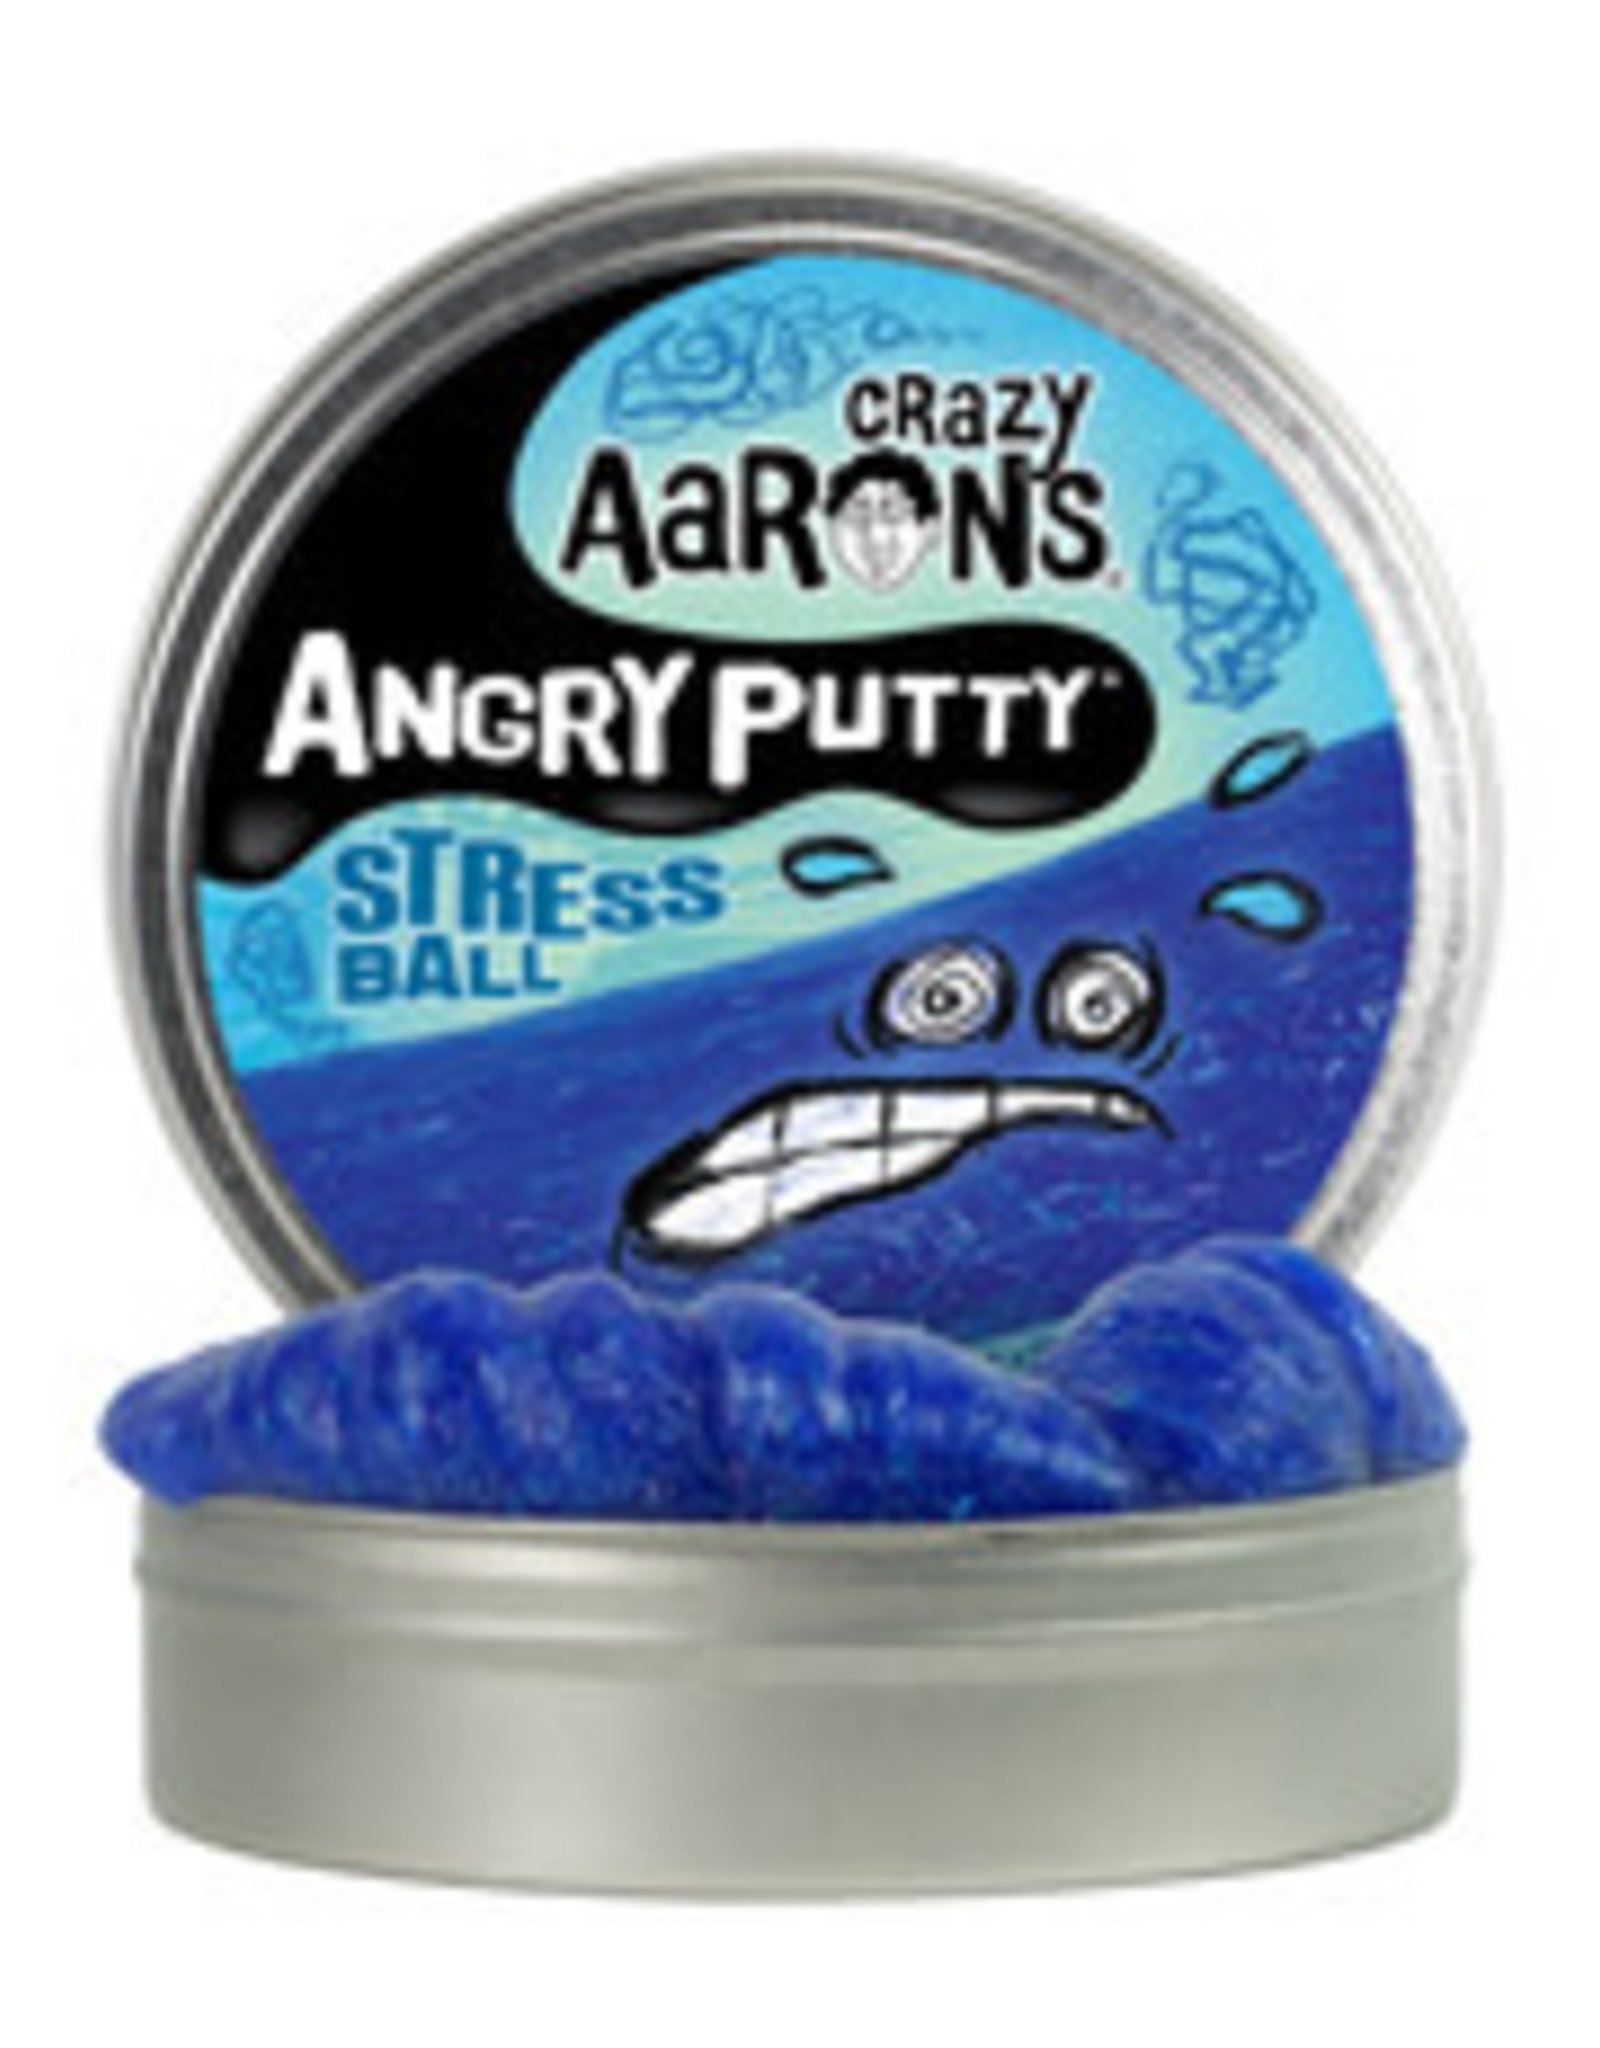 Crazy Aaron's Thinking Putty Crazy Aaron's Angry Putty 4" Tins